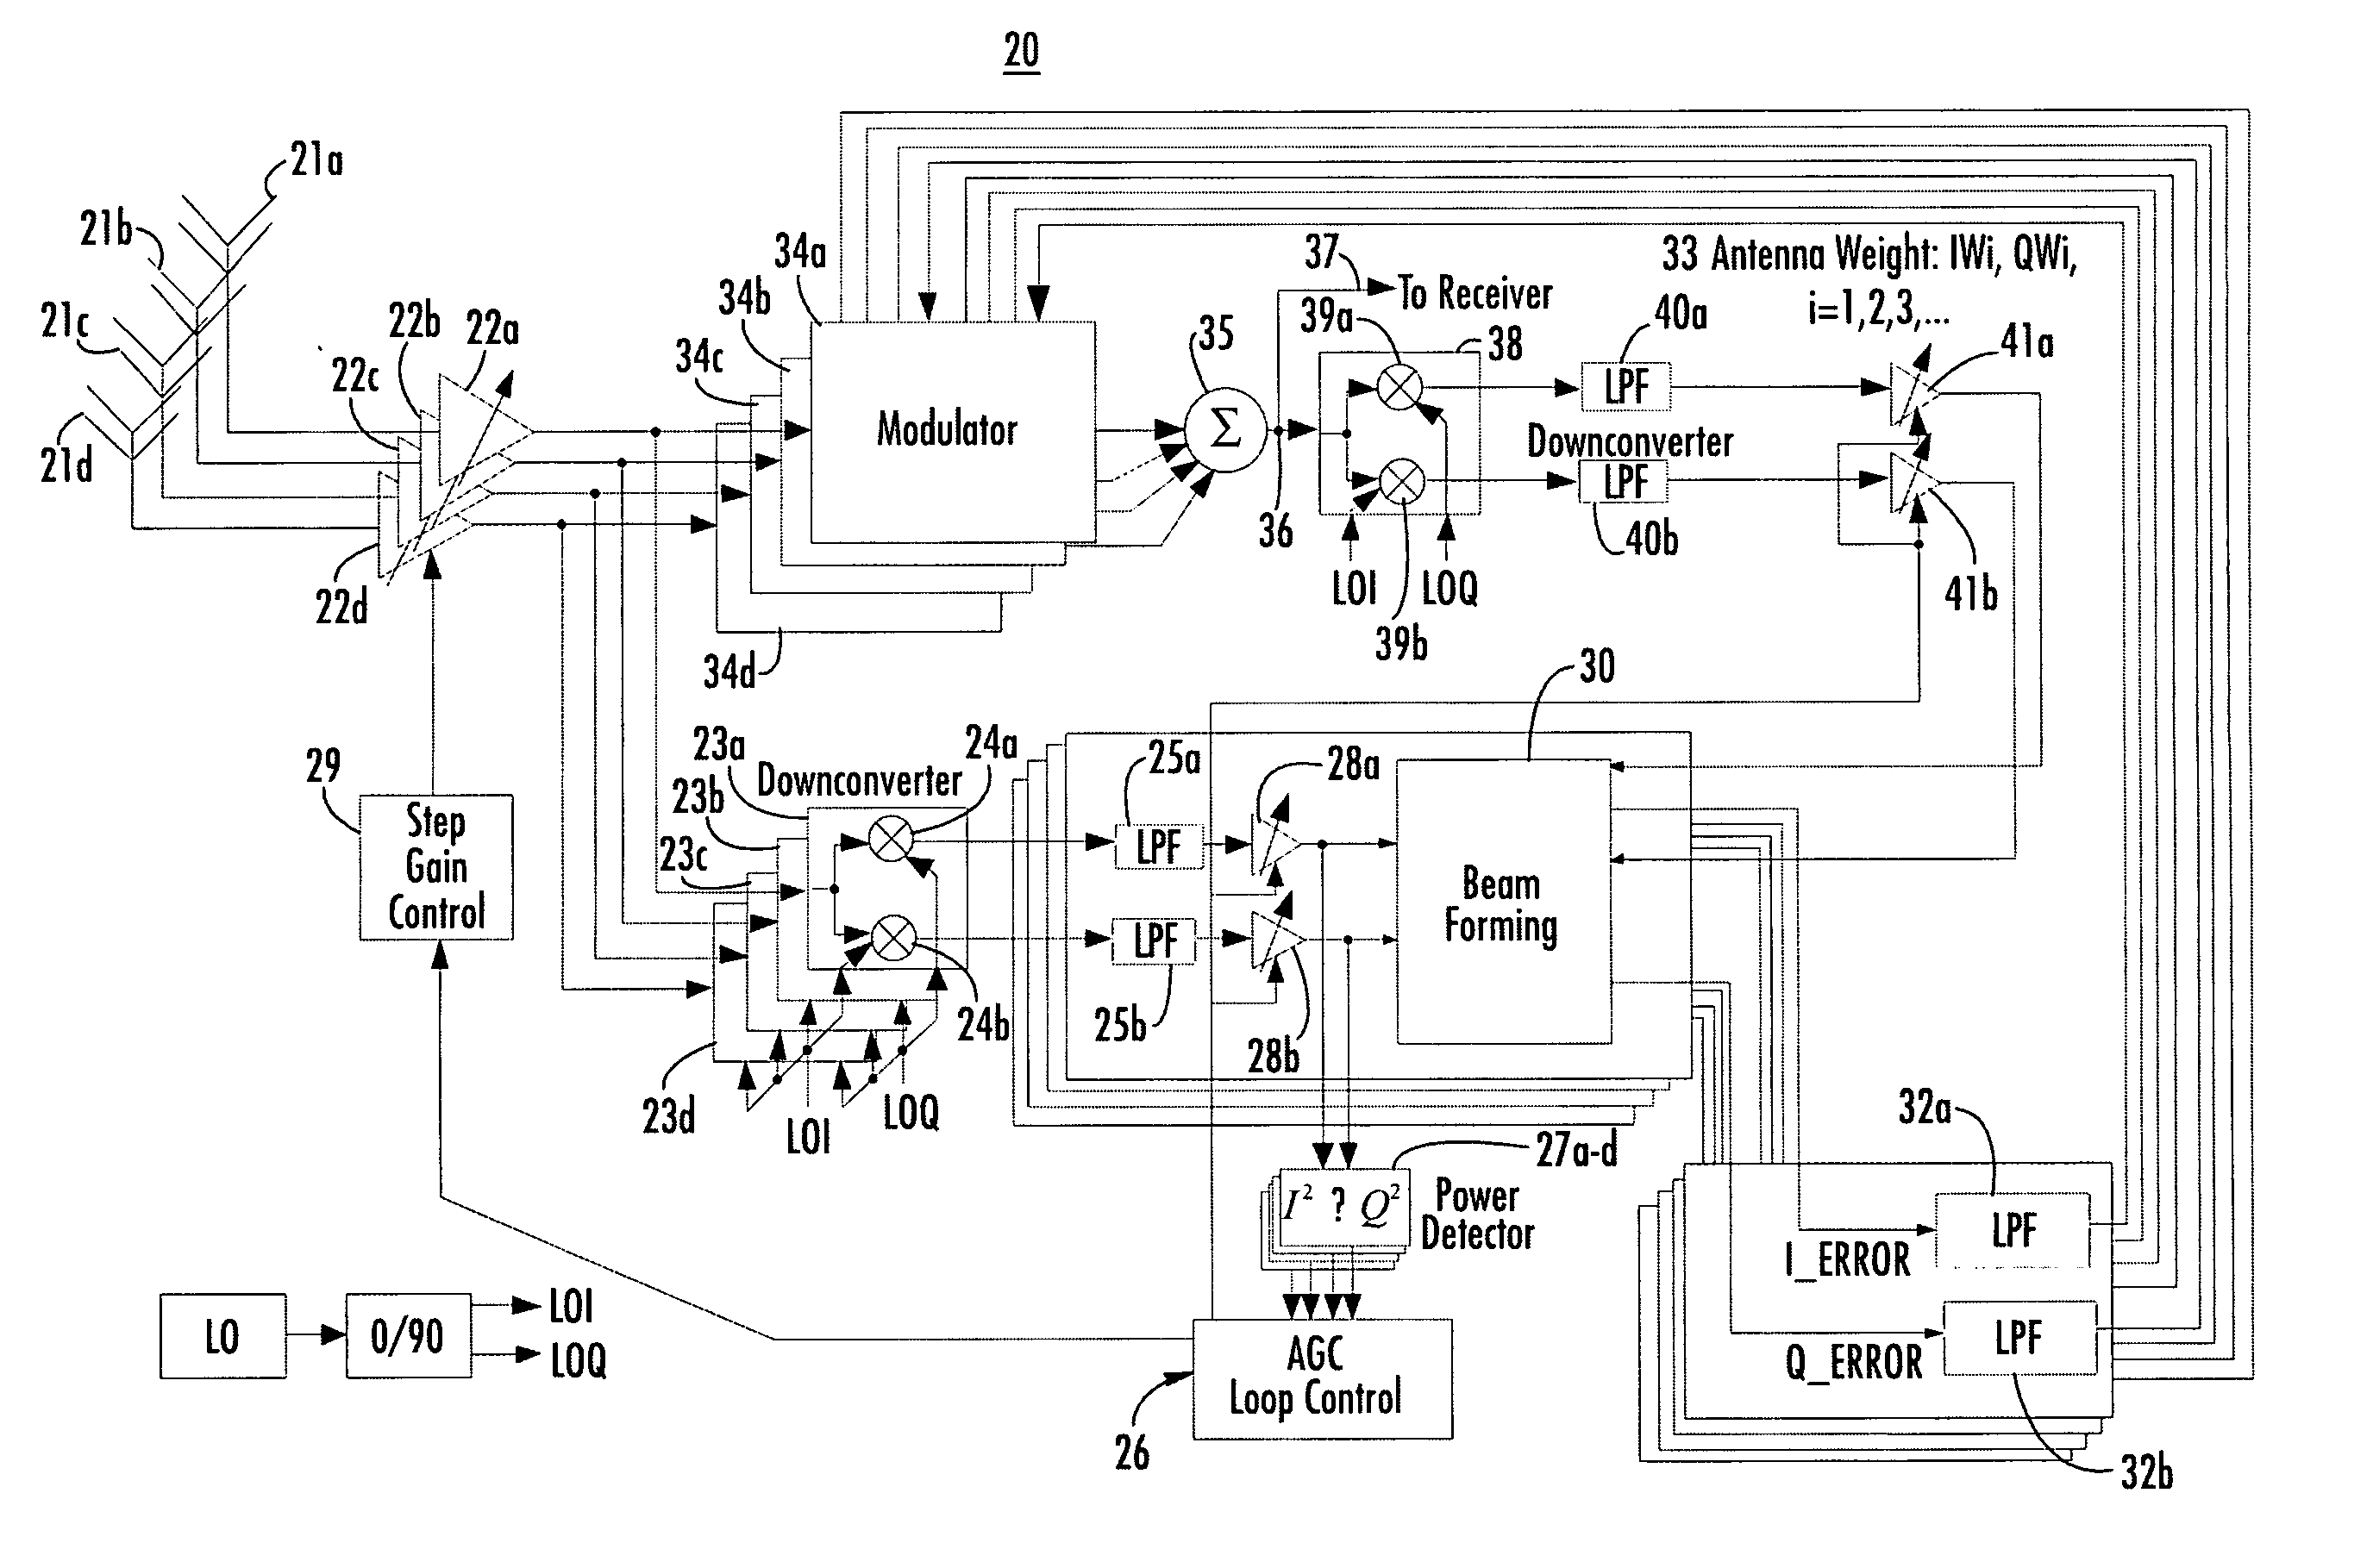 Wireless communication system using a plurality of antenna elements with adaptive weighting and combining techniques